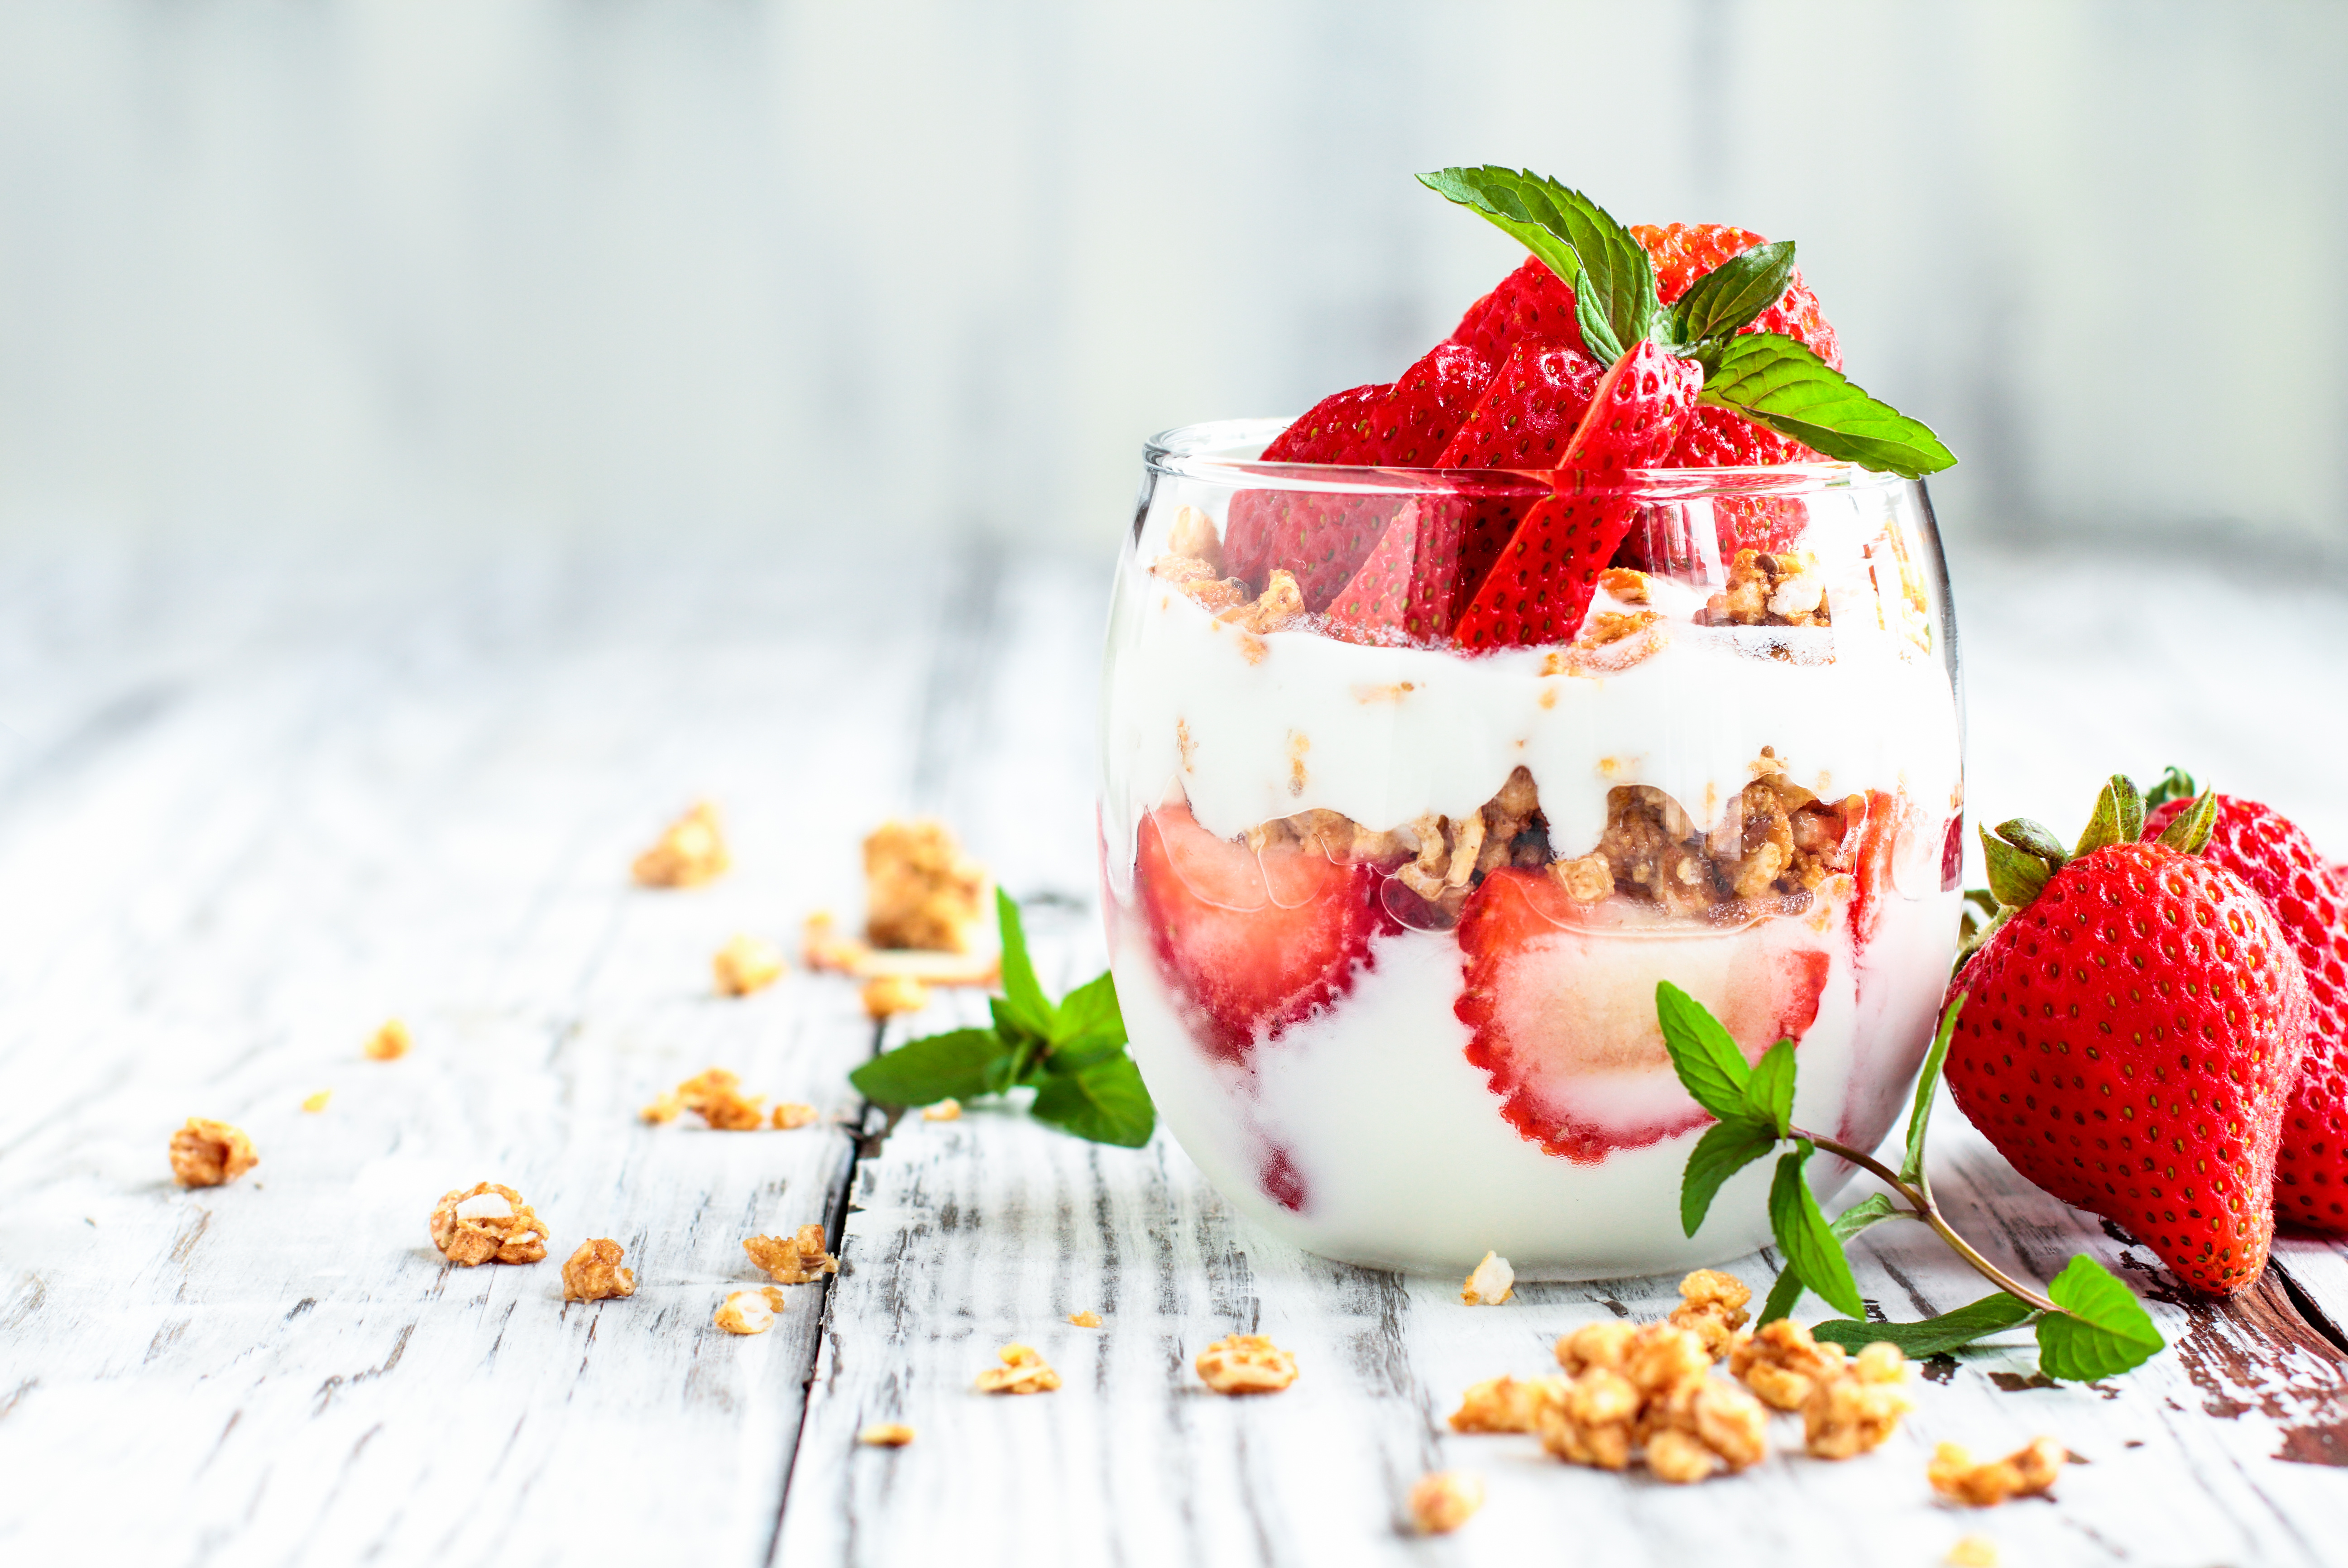 Healthy breakfast of strawberry parfaits made with fresh fruit, yogurt and granola over a rustic white table. Shallow depth of field with selective focus on glass jar in front. Blurred background and copy space.